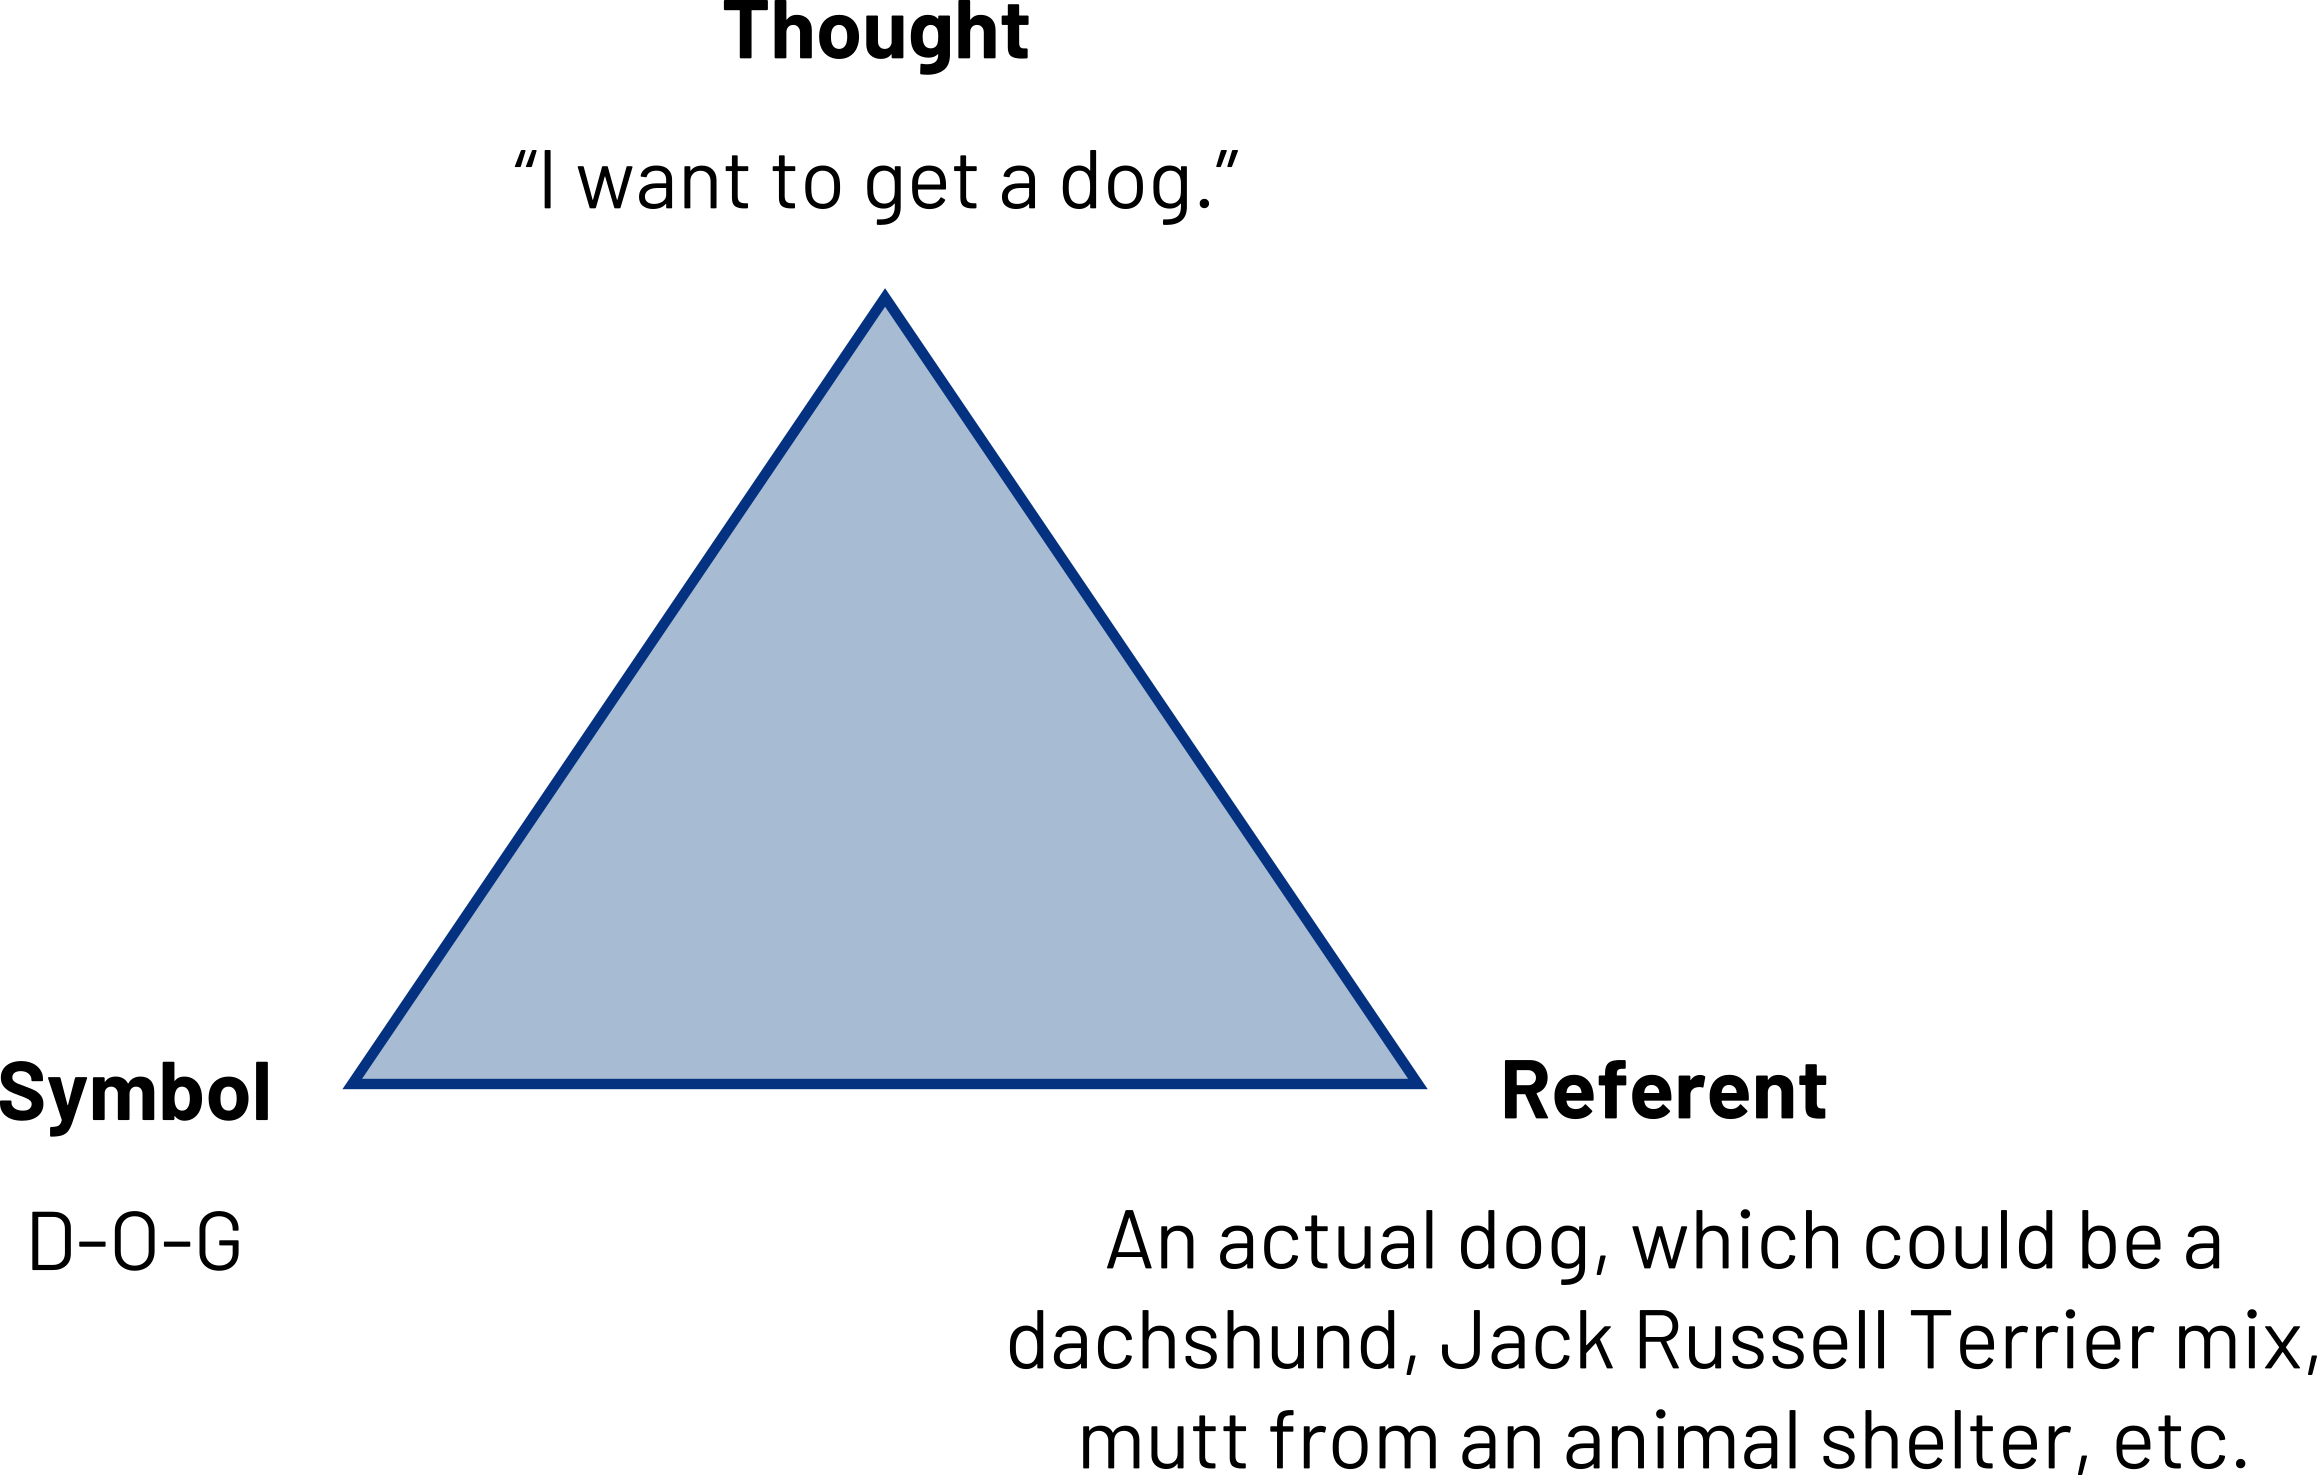 Triangle. Top: Thought. "I want to get a dog." Right: Referent. An actual dog, which could be a dachshund, Jack Russell Terrier mix, mutt from an animal shelter, etc. Left: Symbol. D-O-G.